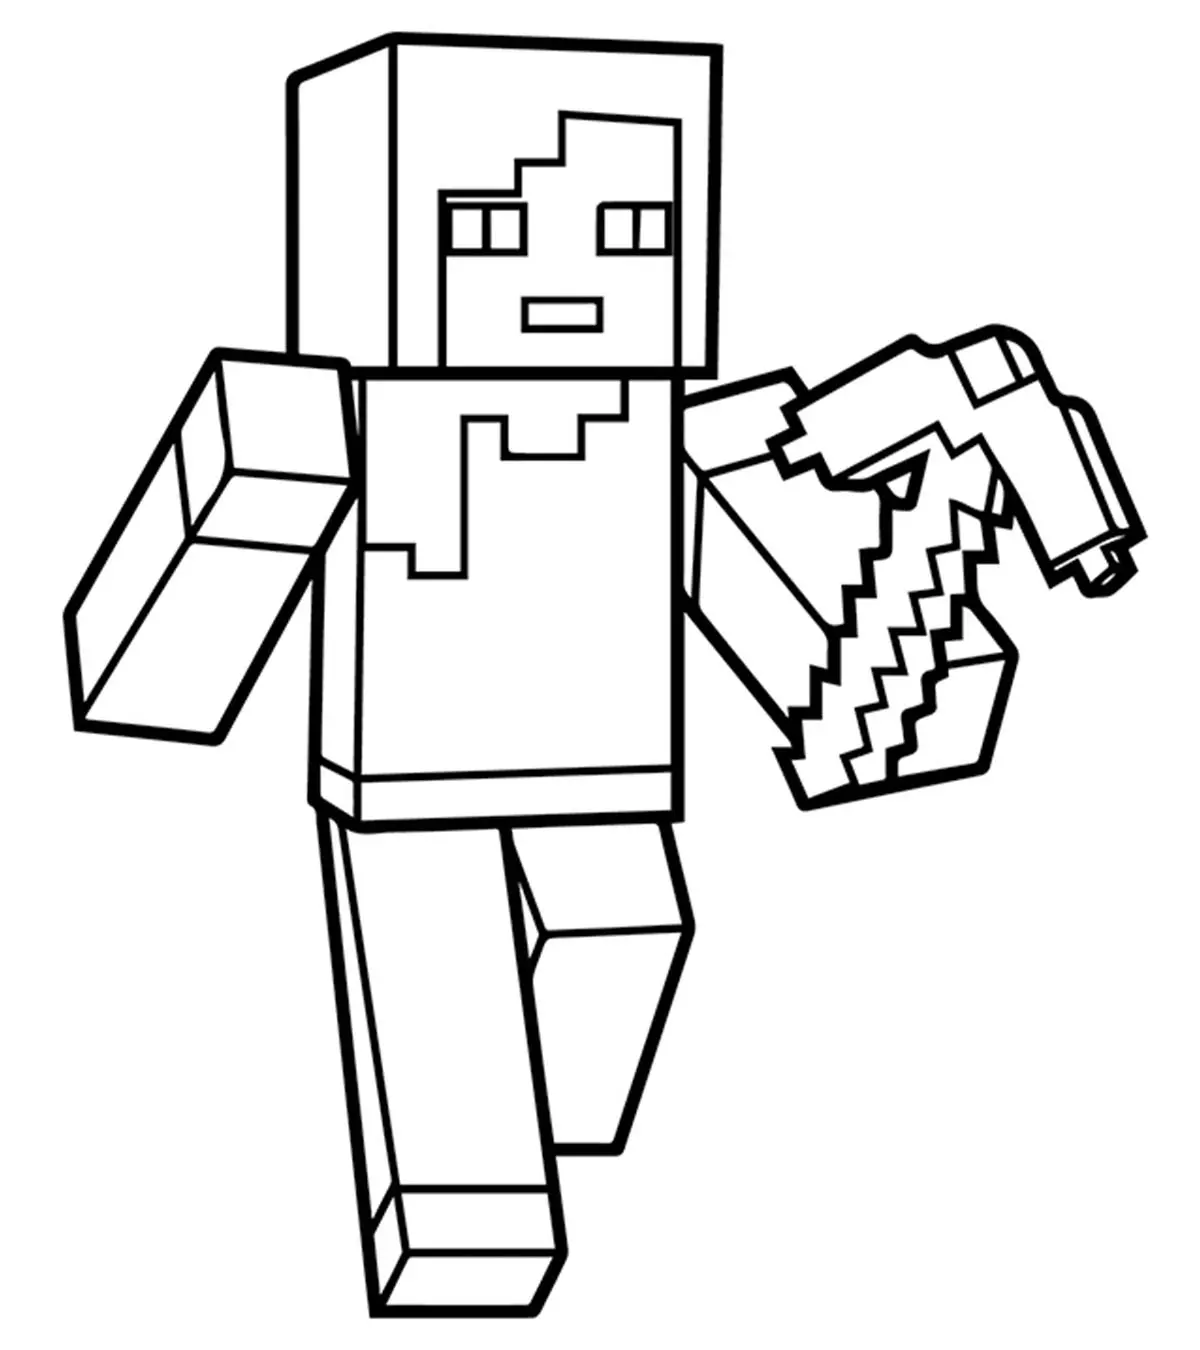 37 Awesome Printable Minecraft Coloring Pages For Toddlers image